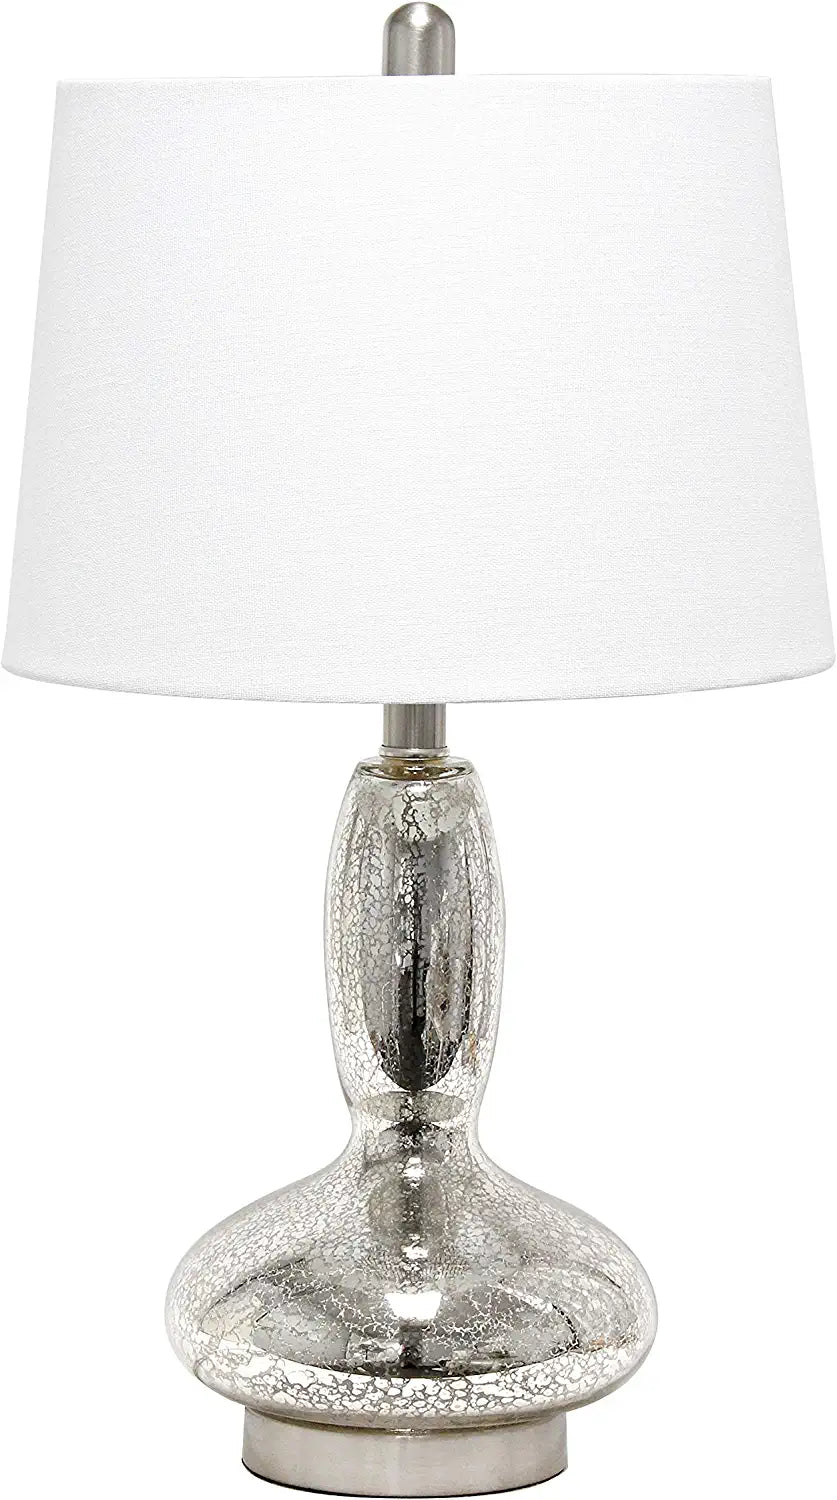 Elegant Designs LT3315-WHT Contemporary Curved Glass Table Lamp, White